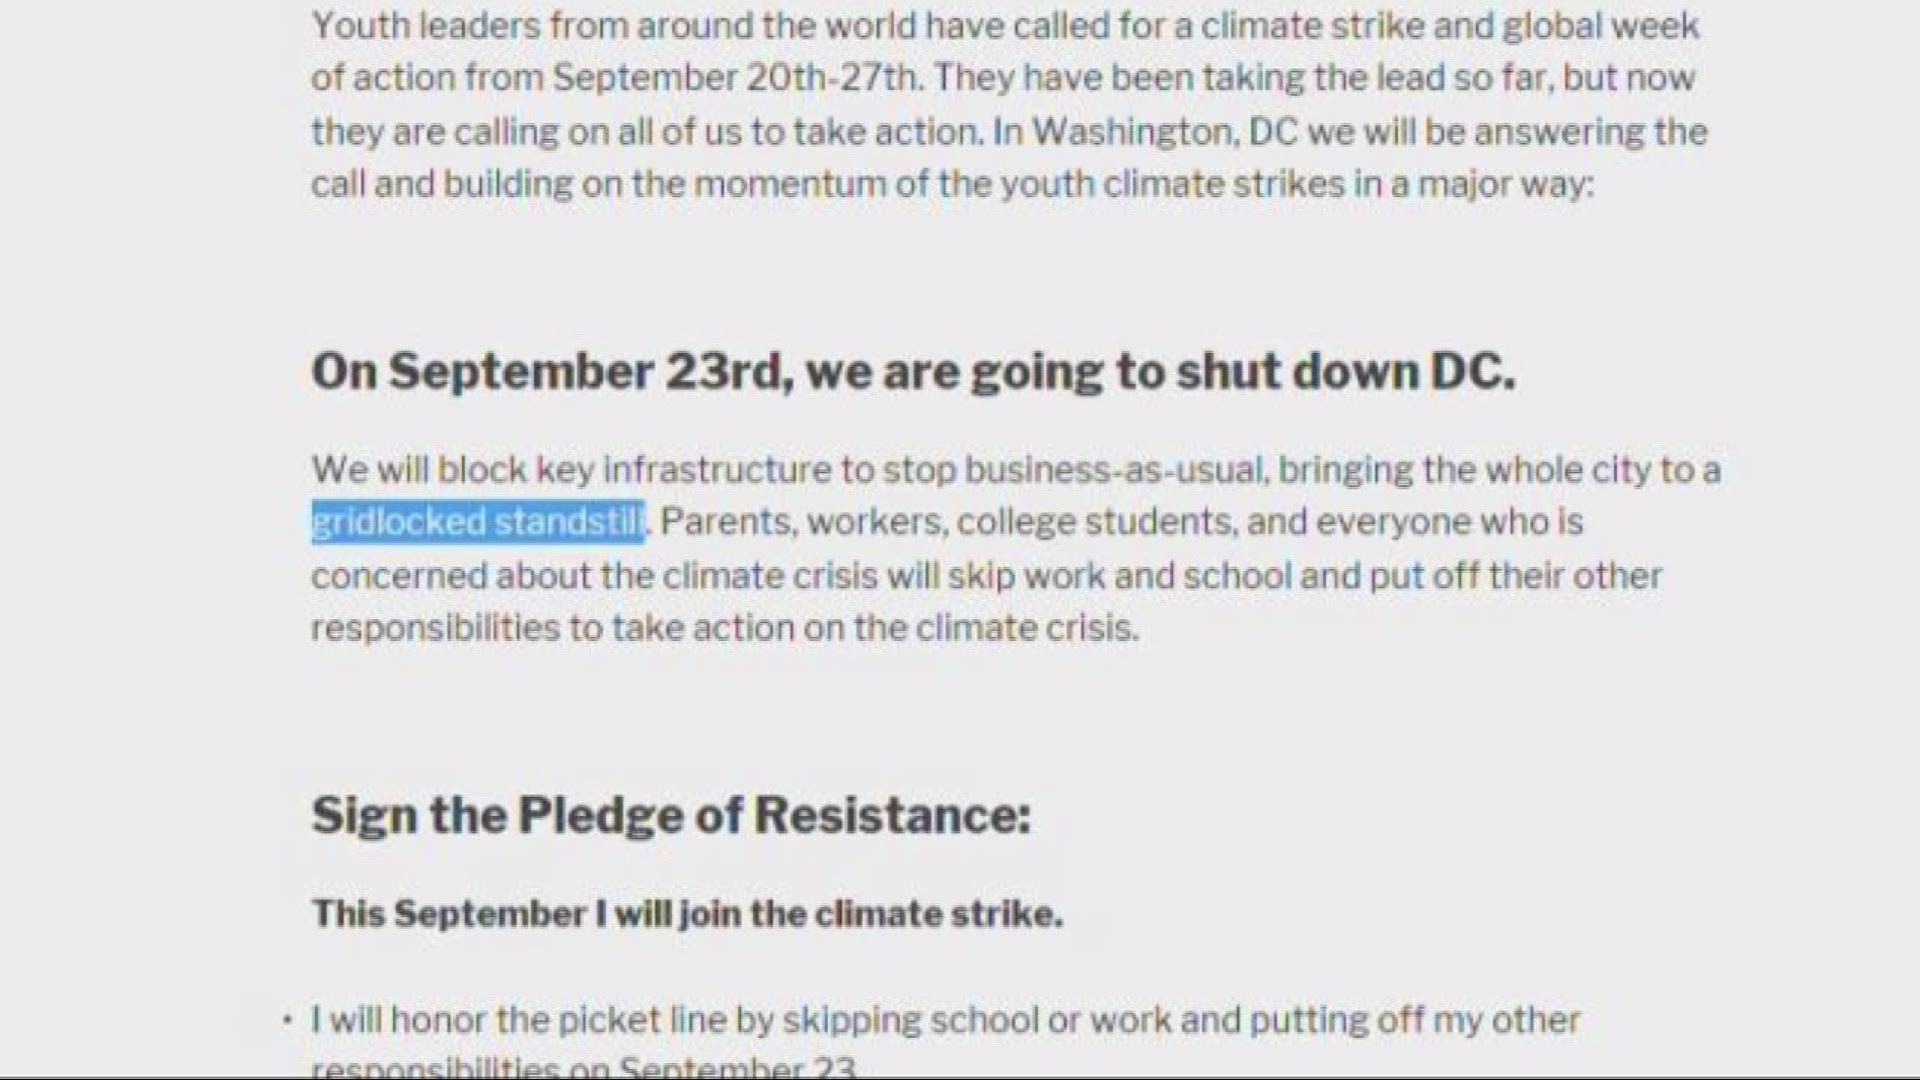 Climate change activists have announced plans to bring DC to a 'gridlocked standstill' on September 23.